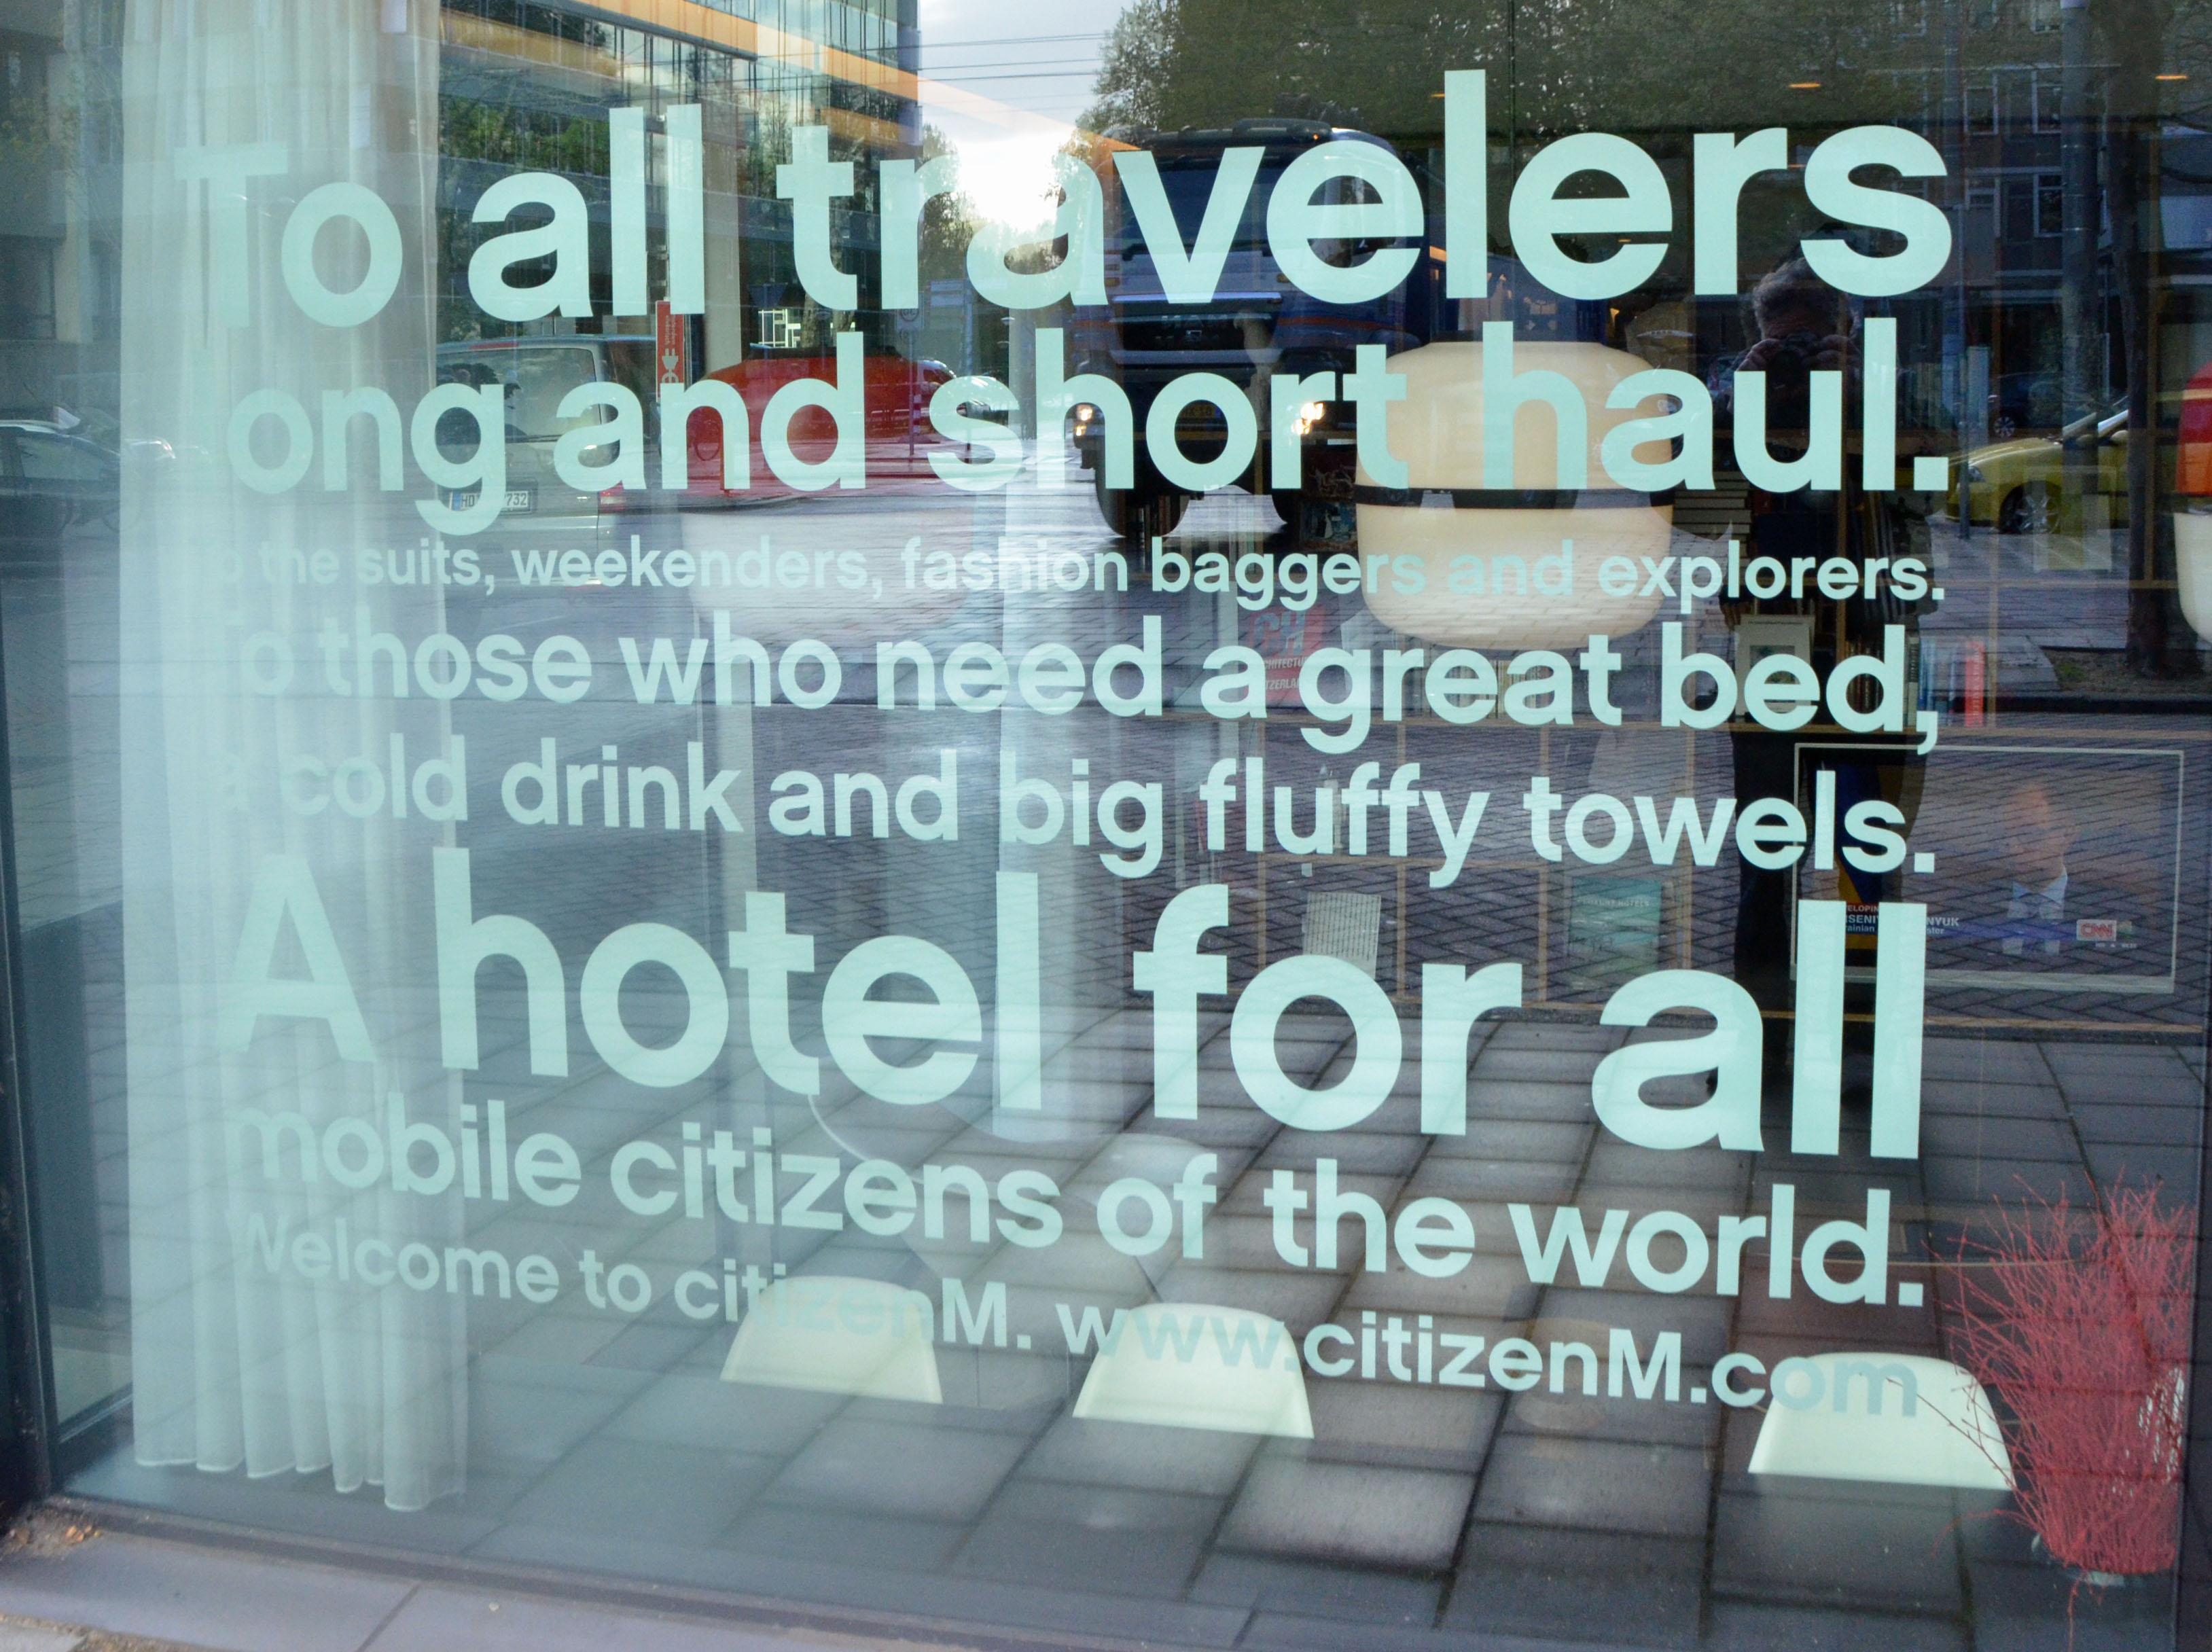 CitizenM statement of principles